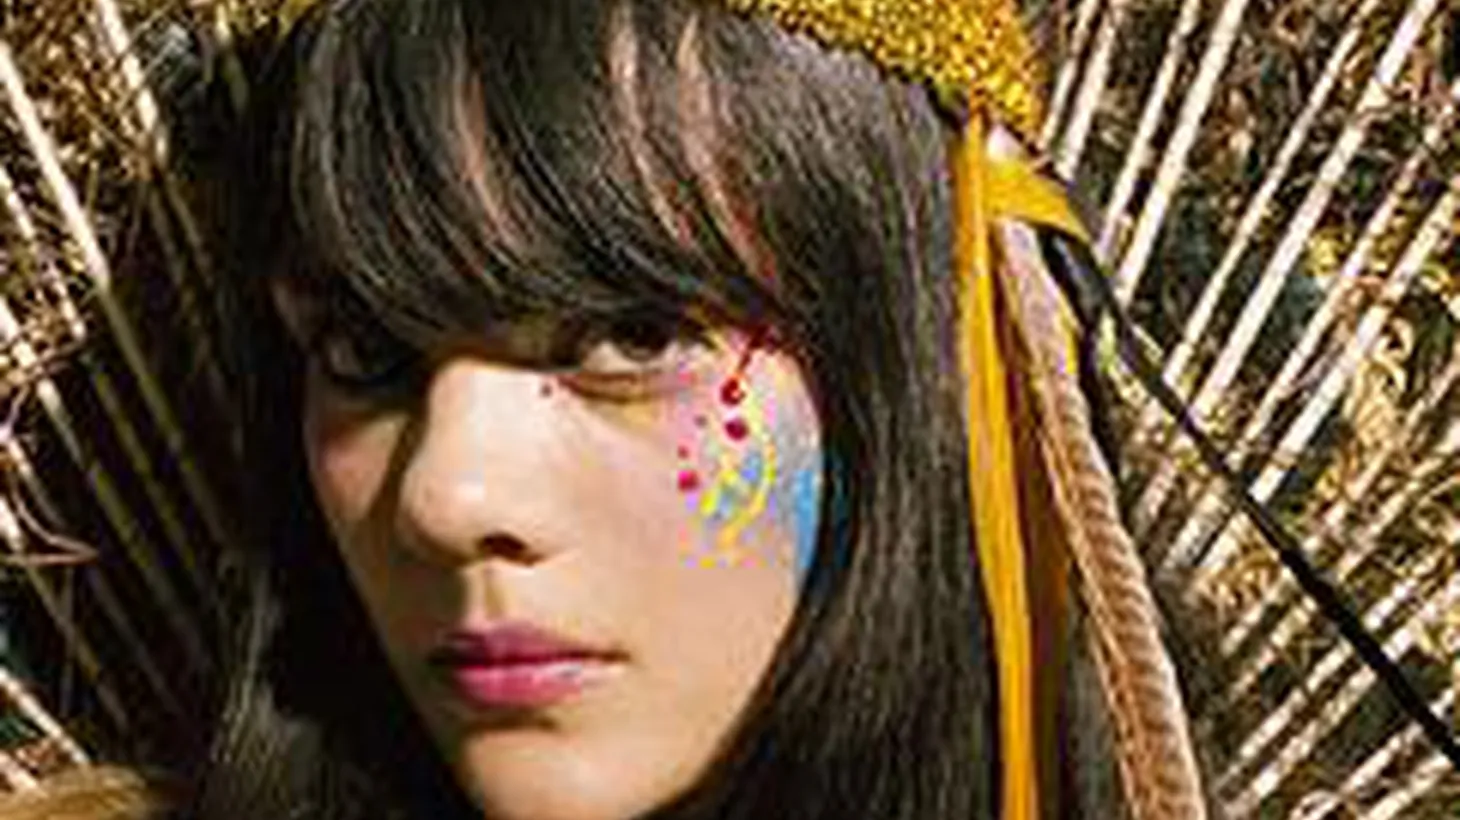 Natasha Khan frontwoman for Bat For Lashes brings a batch of tunes for Morning Becomes Eclectic at 11:15am.